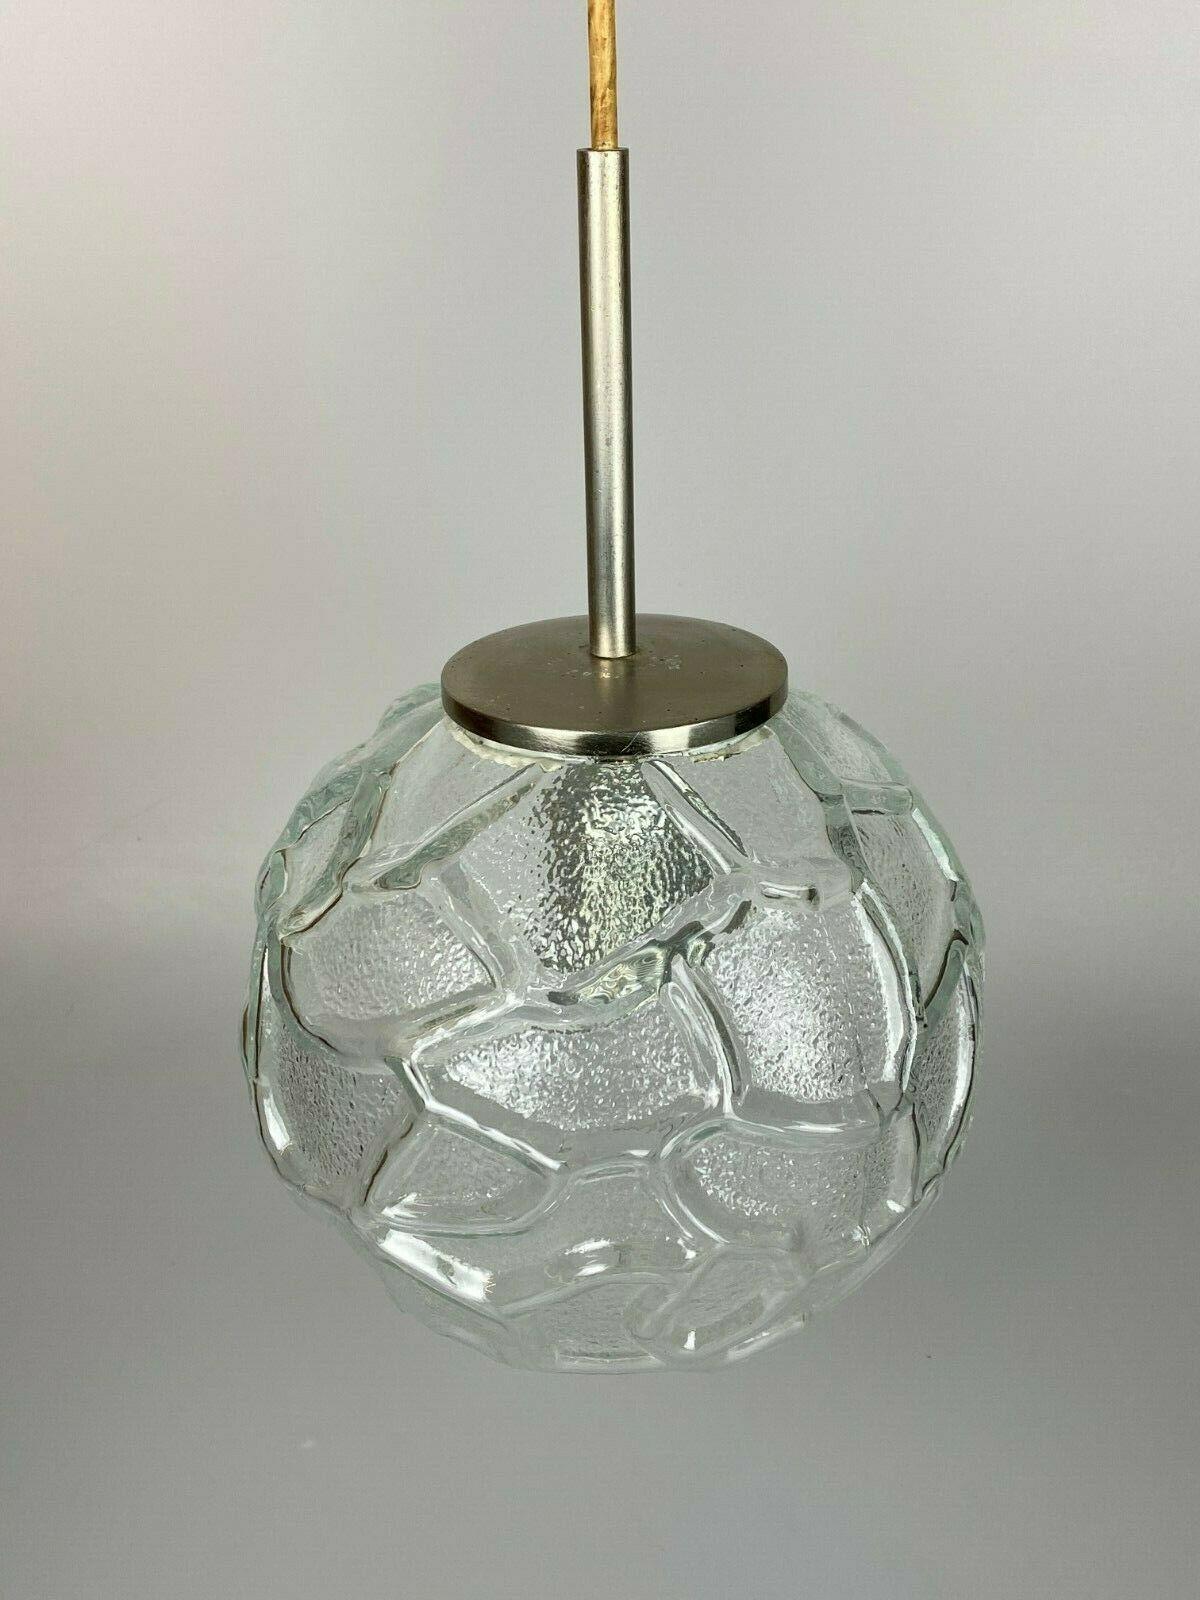 60s 70s Lamp Light Ceiling Lamp Hanging Lamp Hillebrand Glass Space Age Design In Good Condition For Sale In Neuenkirchen, NI